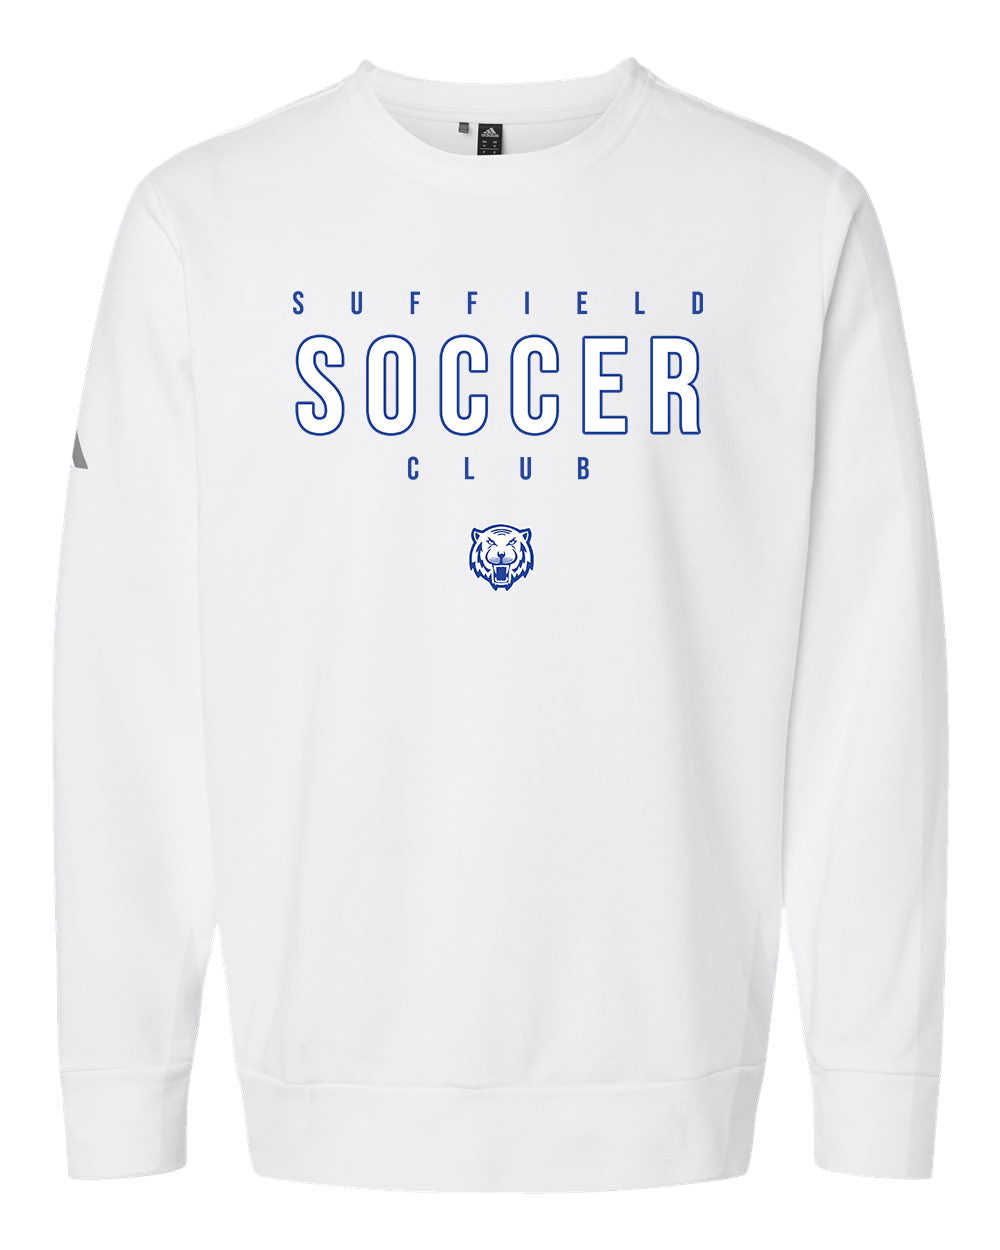 Suffield Soccer Club Adult Adidas Crewneck "SSC" - A434 (color options available)